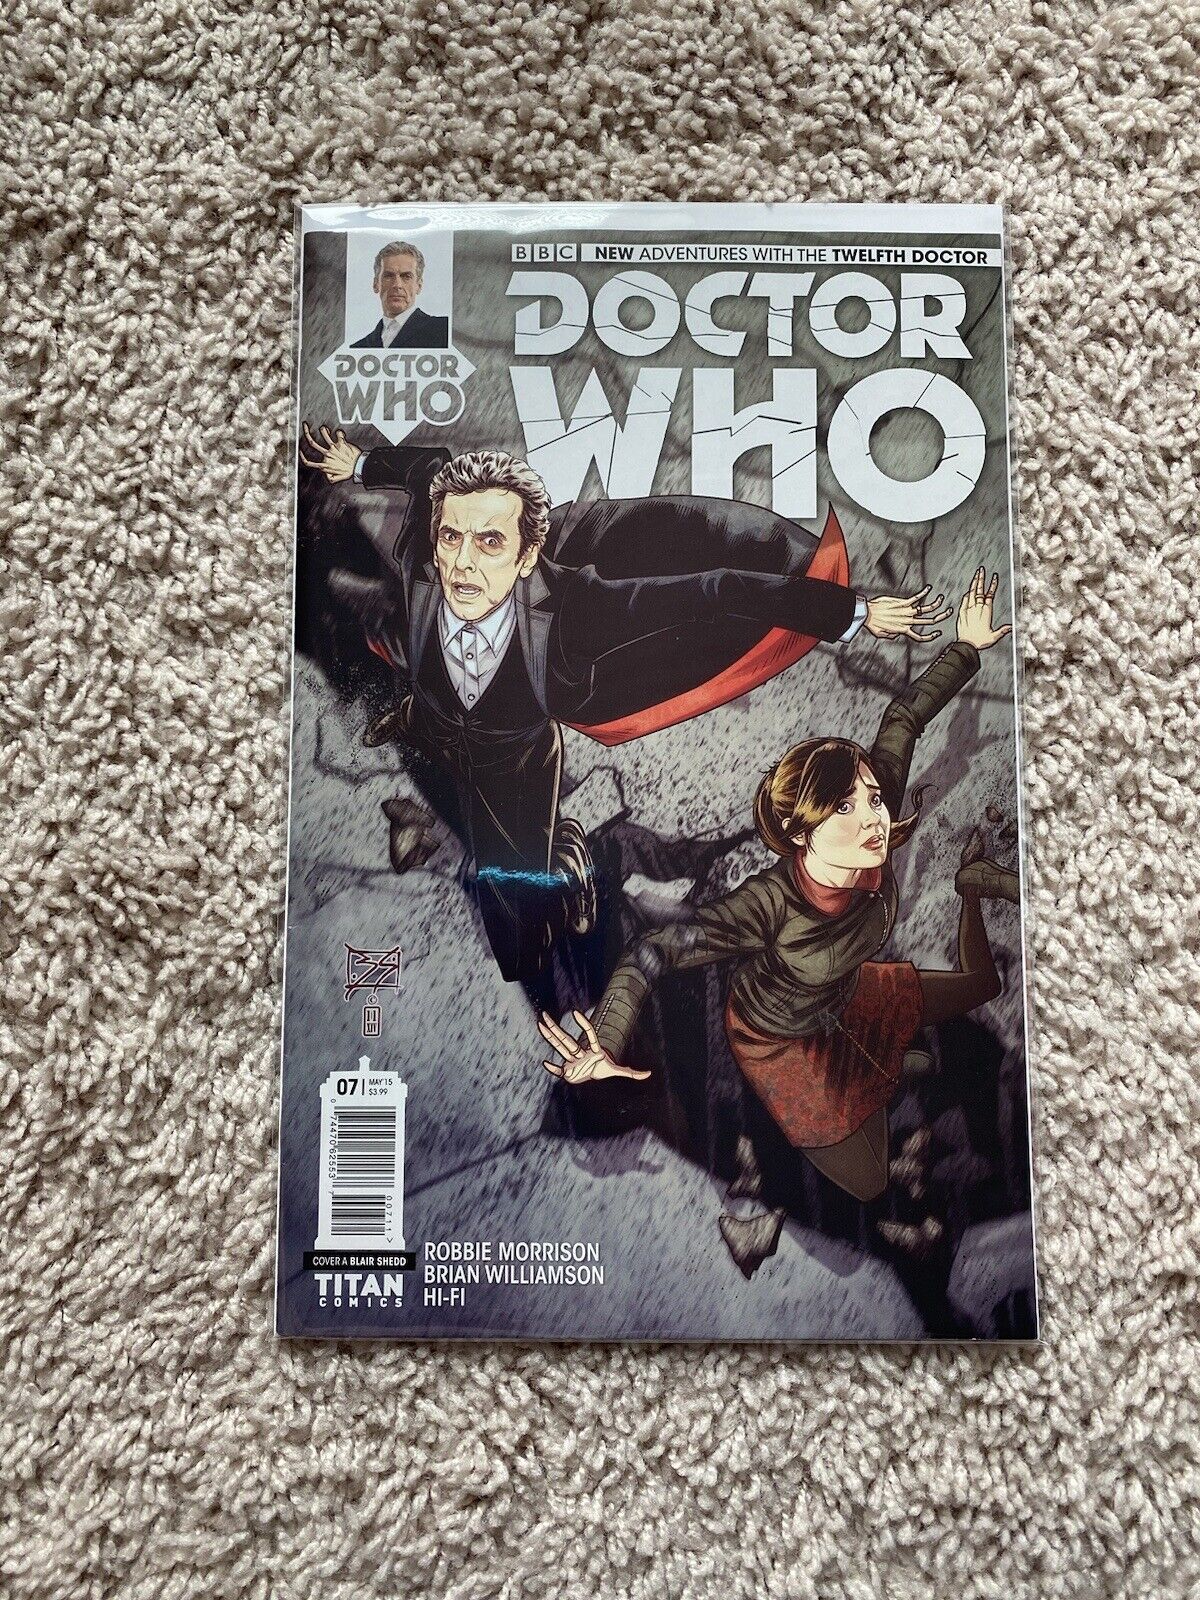 NEAR MINT Titan Comics 2015 Doctor Who: The Twelfth Doctor #7 Cover A